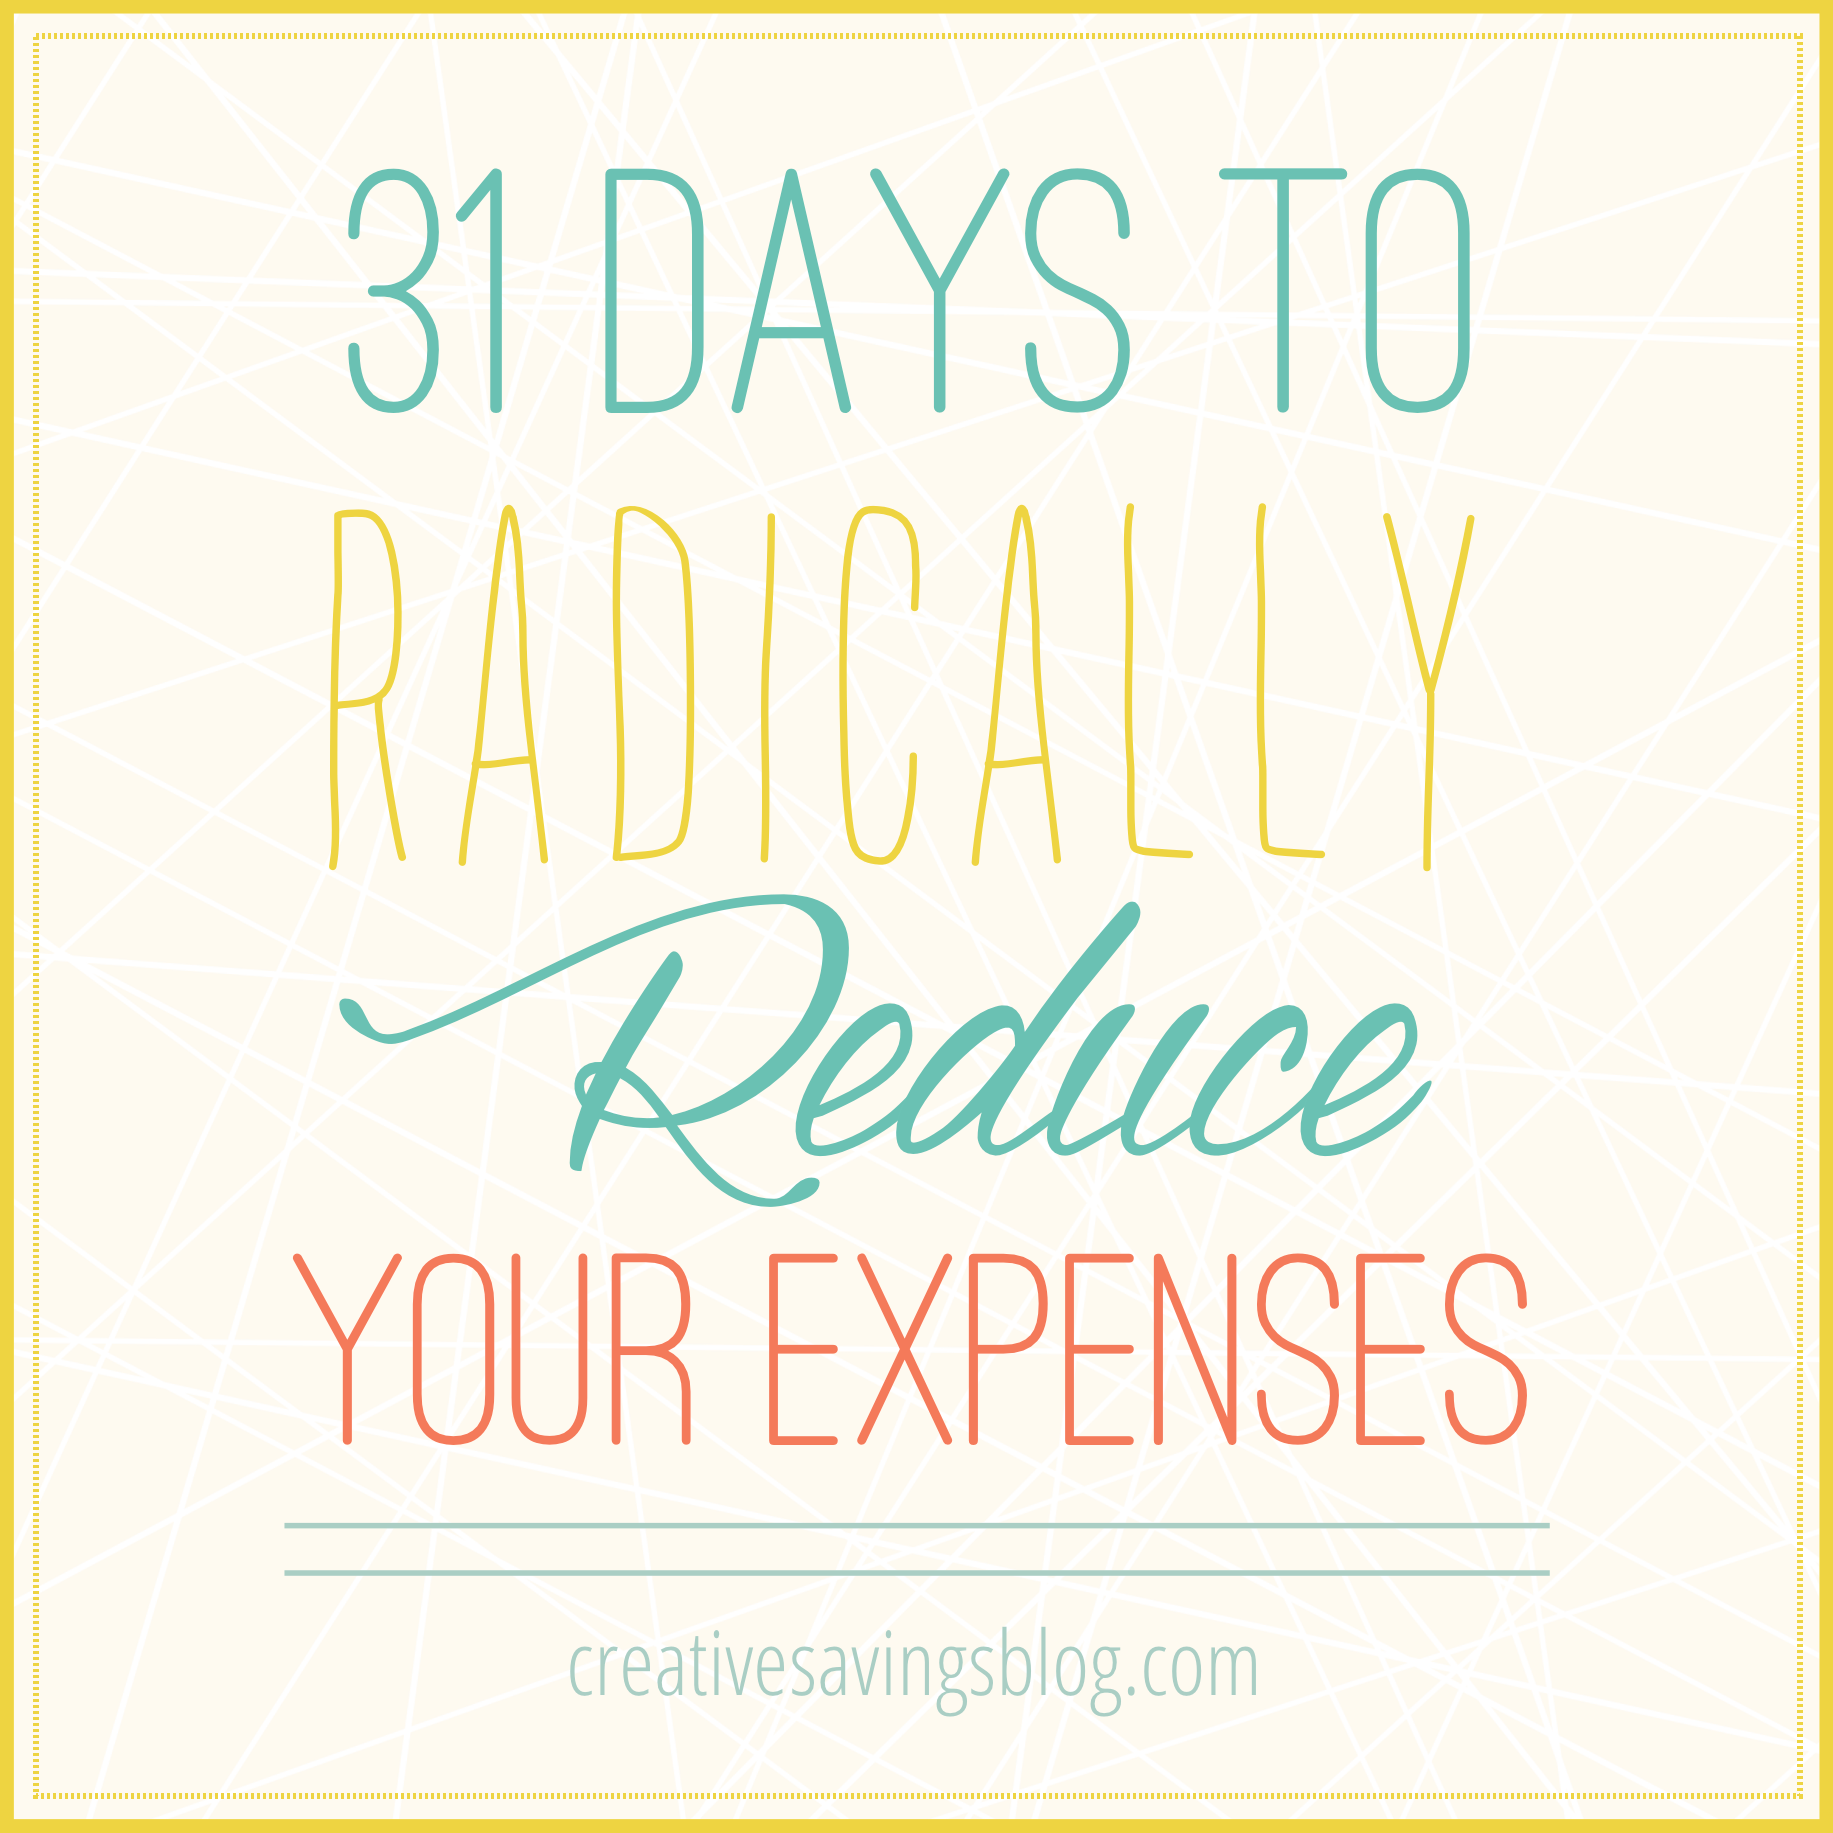 If monthly payments are taking control of your budget, you don't want to miss this 31 Days Series to Radically Reduce Your Expenses.